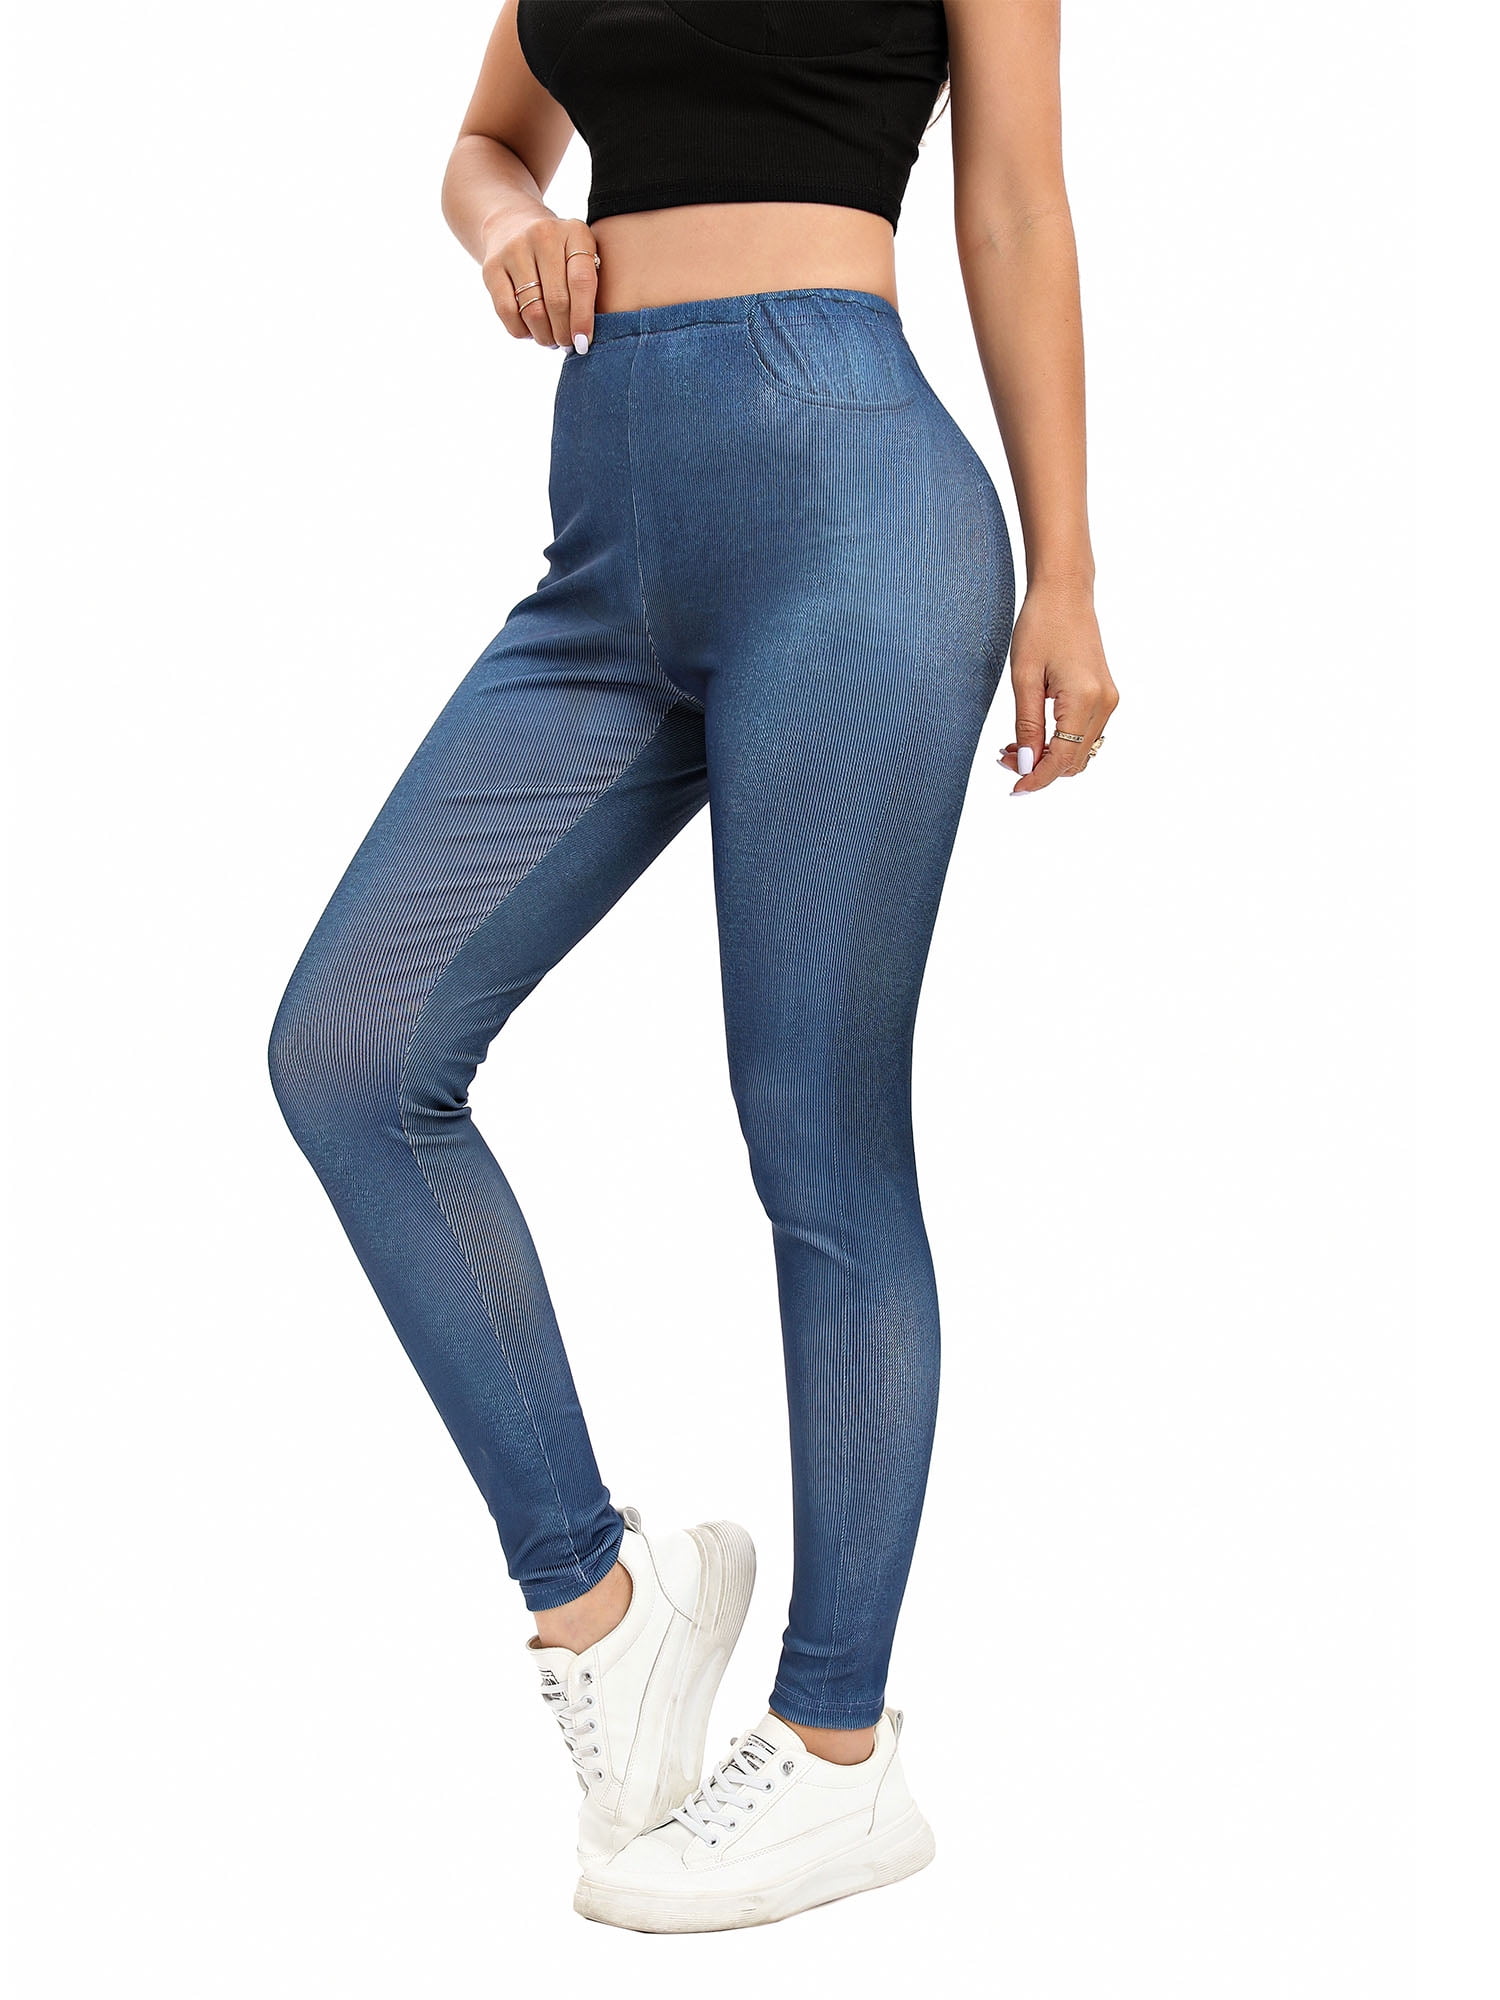 Glonme Ladies Fake Jeans Seamless Leggings Tummy Control Faux Denim Pant  Workout Comfy Jeggings Stretch High Waist Bottoms Blue-B S 